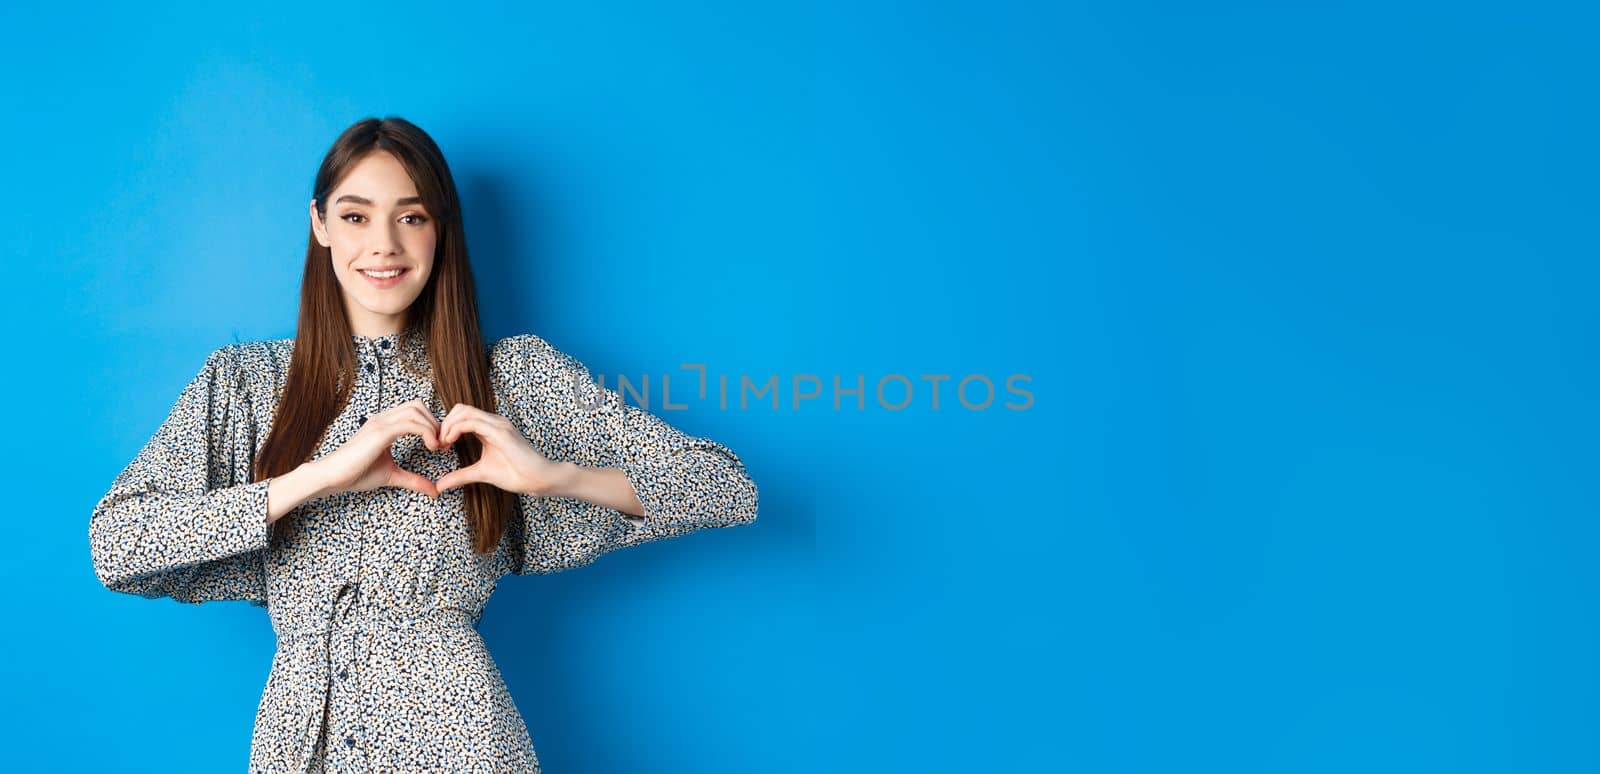 Pretty girl in romantic dress showing I love you heart gesture, smiling at camera, express sympathy and romance, standing on blue background.